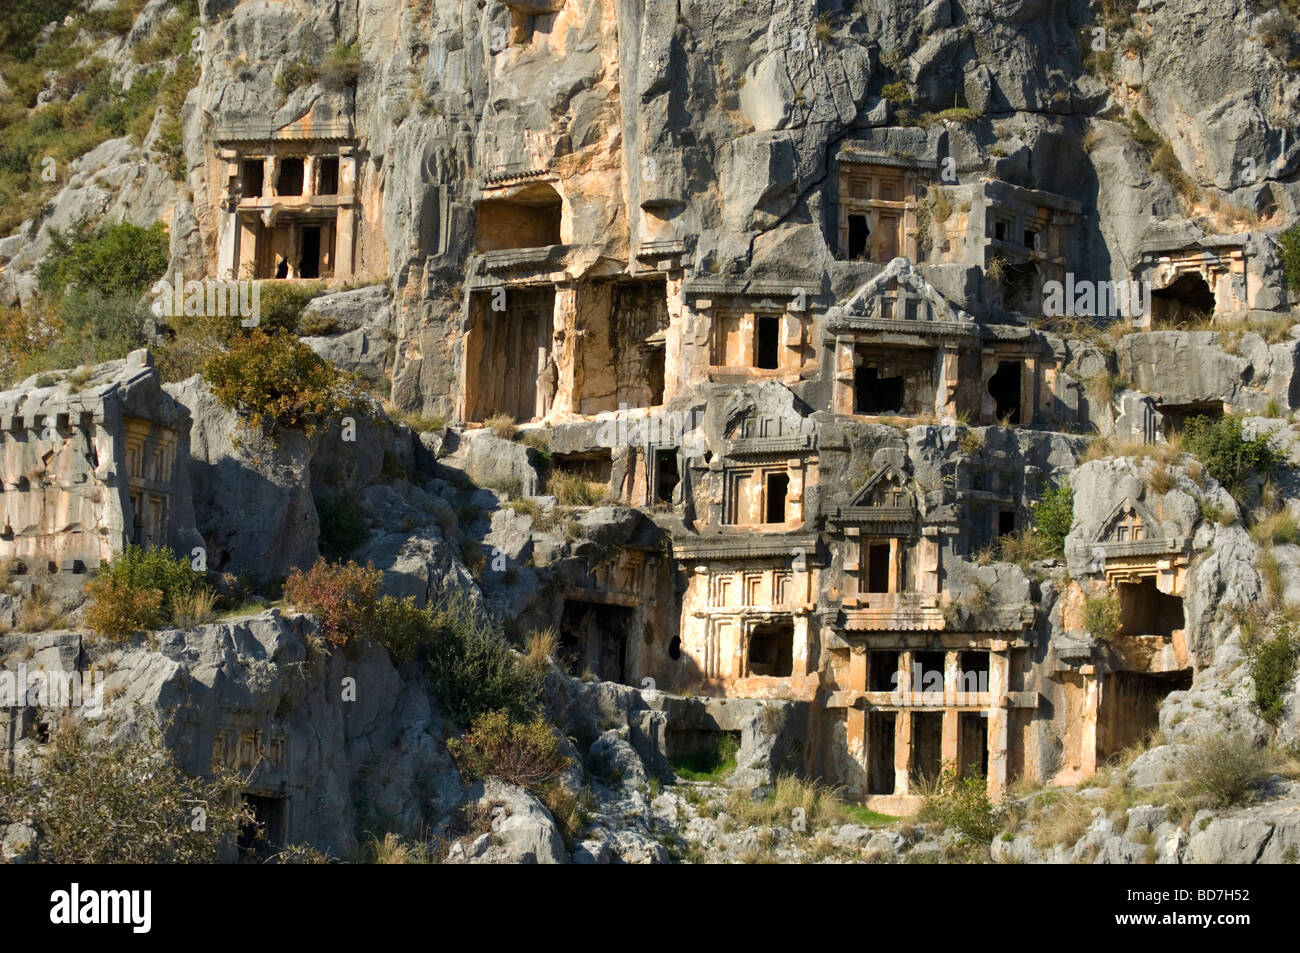 Tombs carved into mountainside Stock Photo